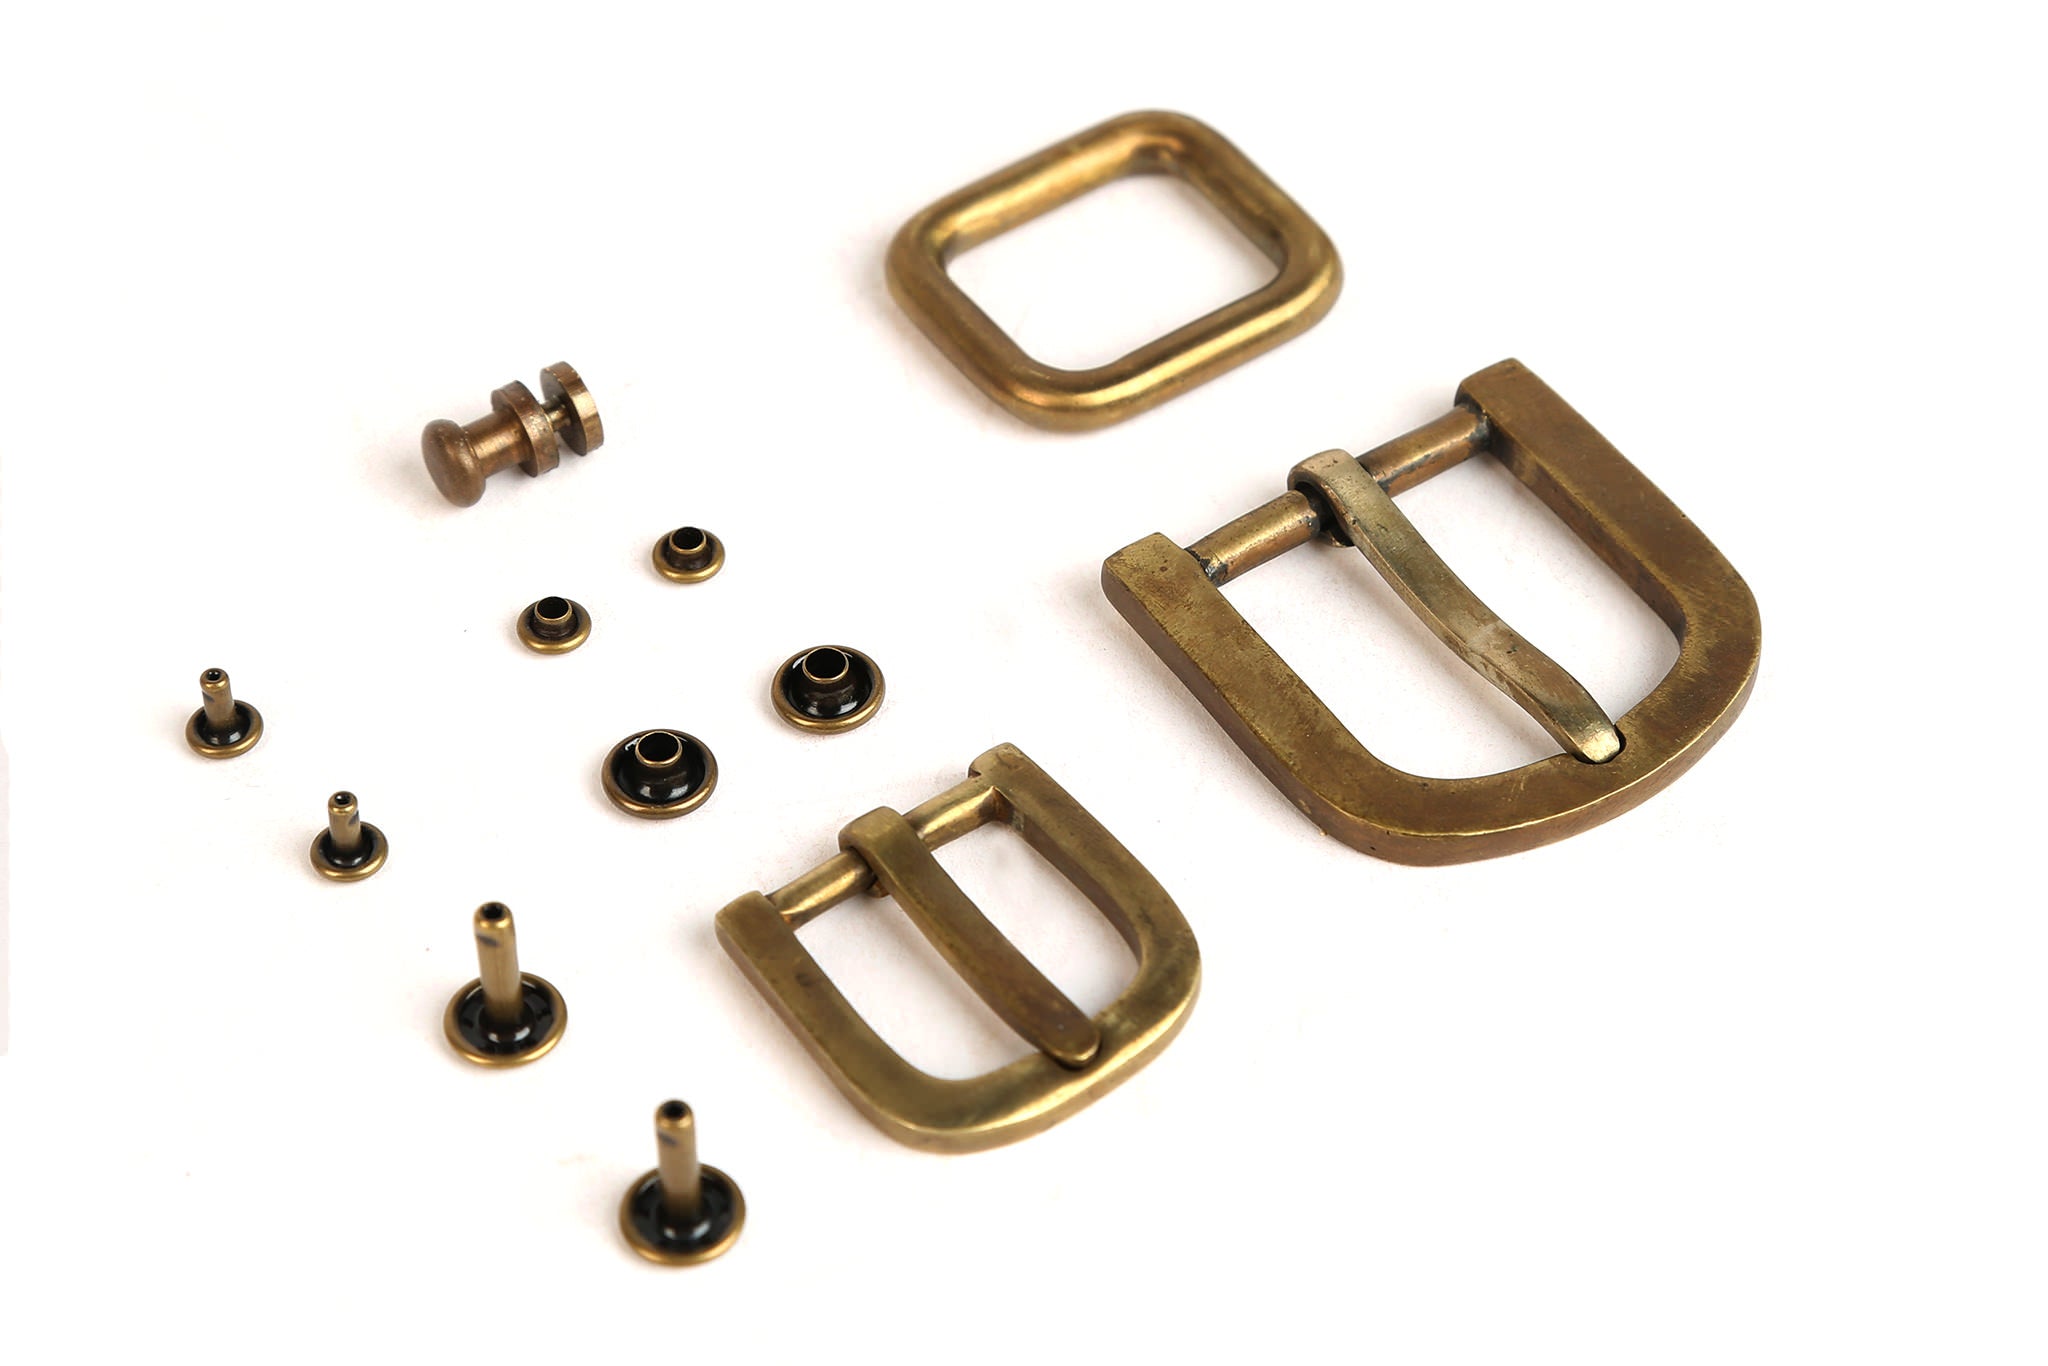 Solid brass accessories with no moving parts, nothing to break.